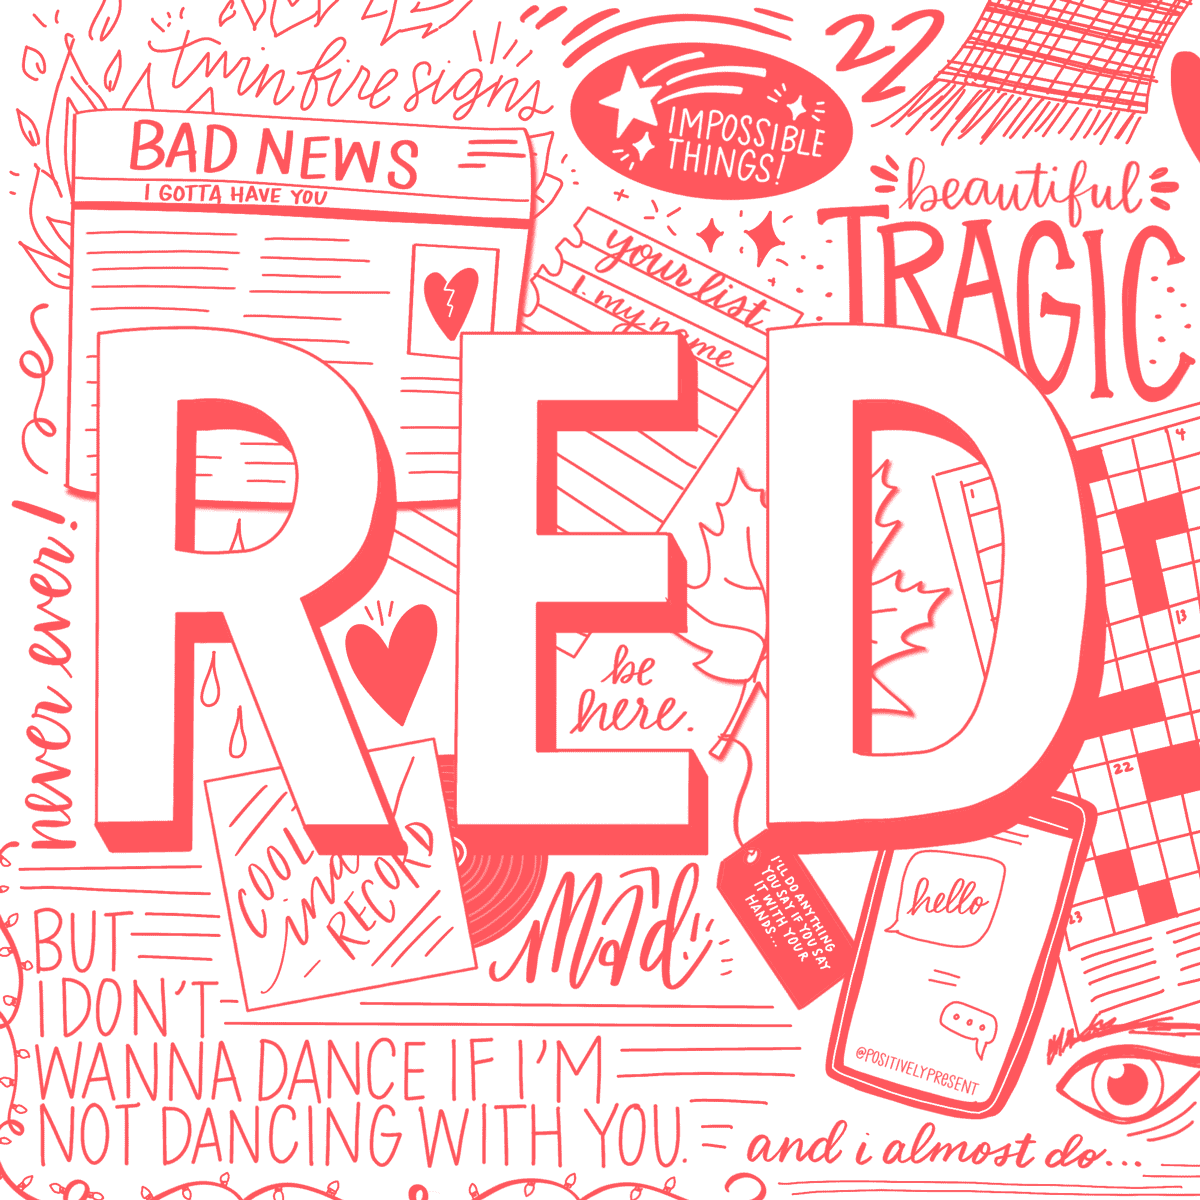 sketch with word RED has lyrics from Taylor Swift song Treacherous.